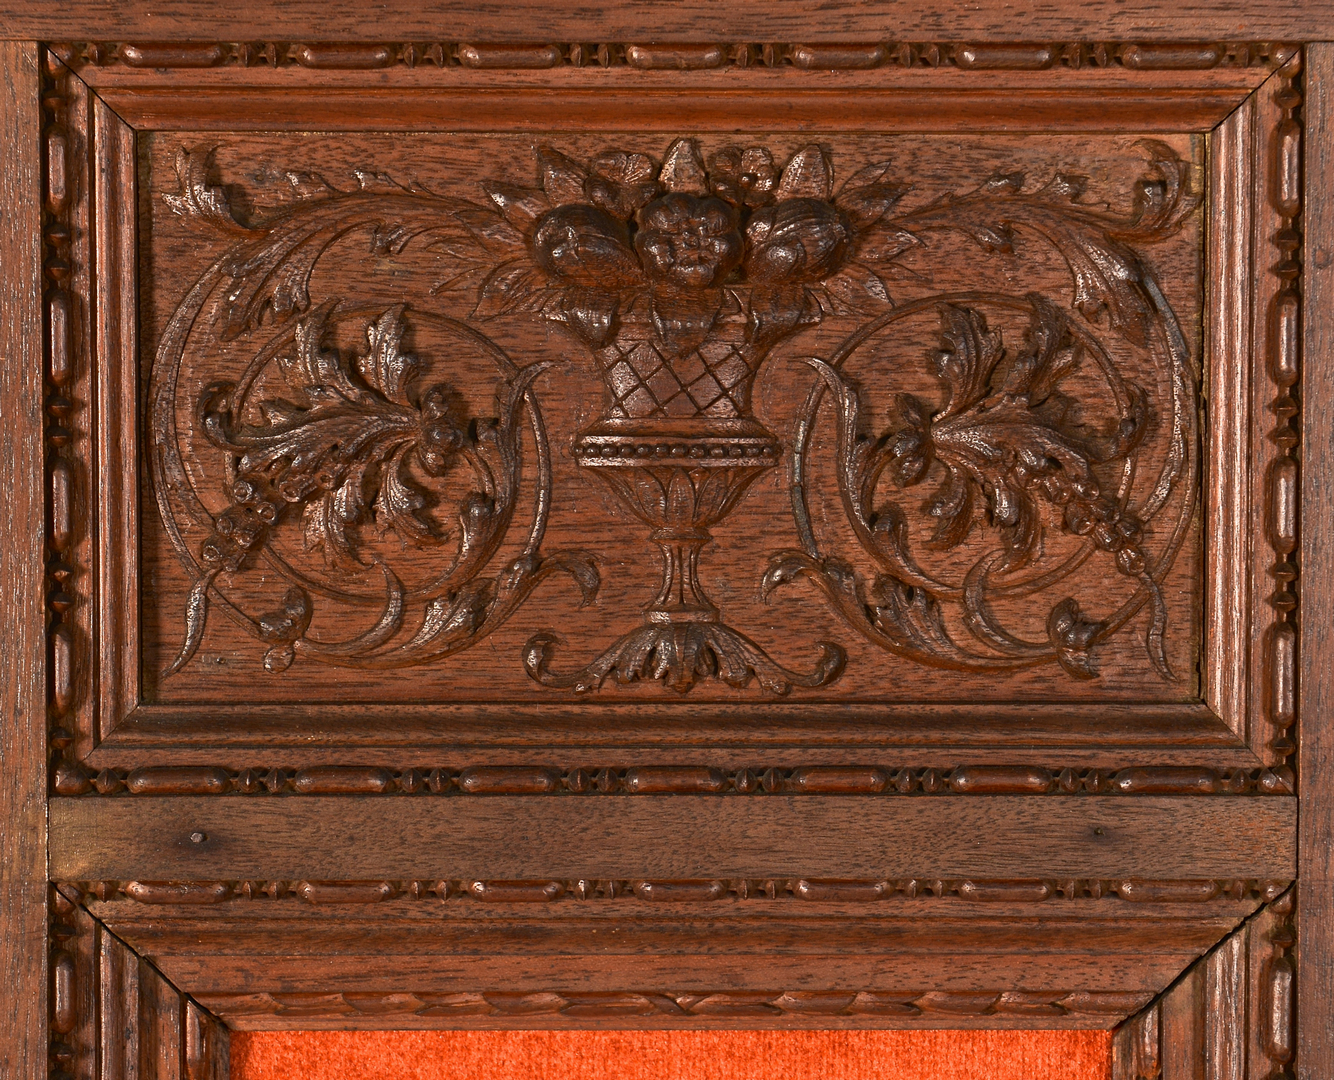 Lot 275: 4 European Wooden Carved Panels | Case Auctions